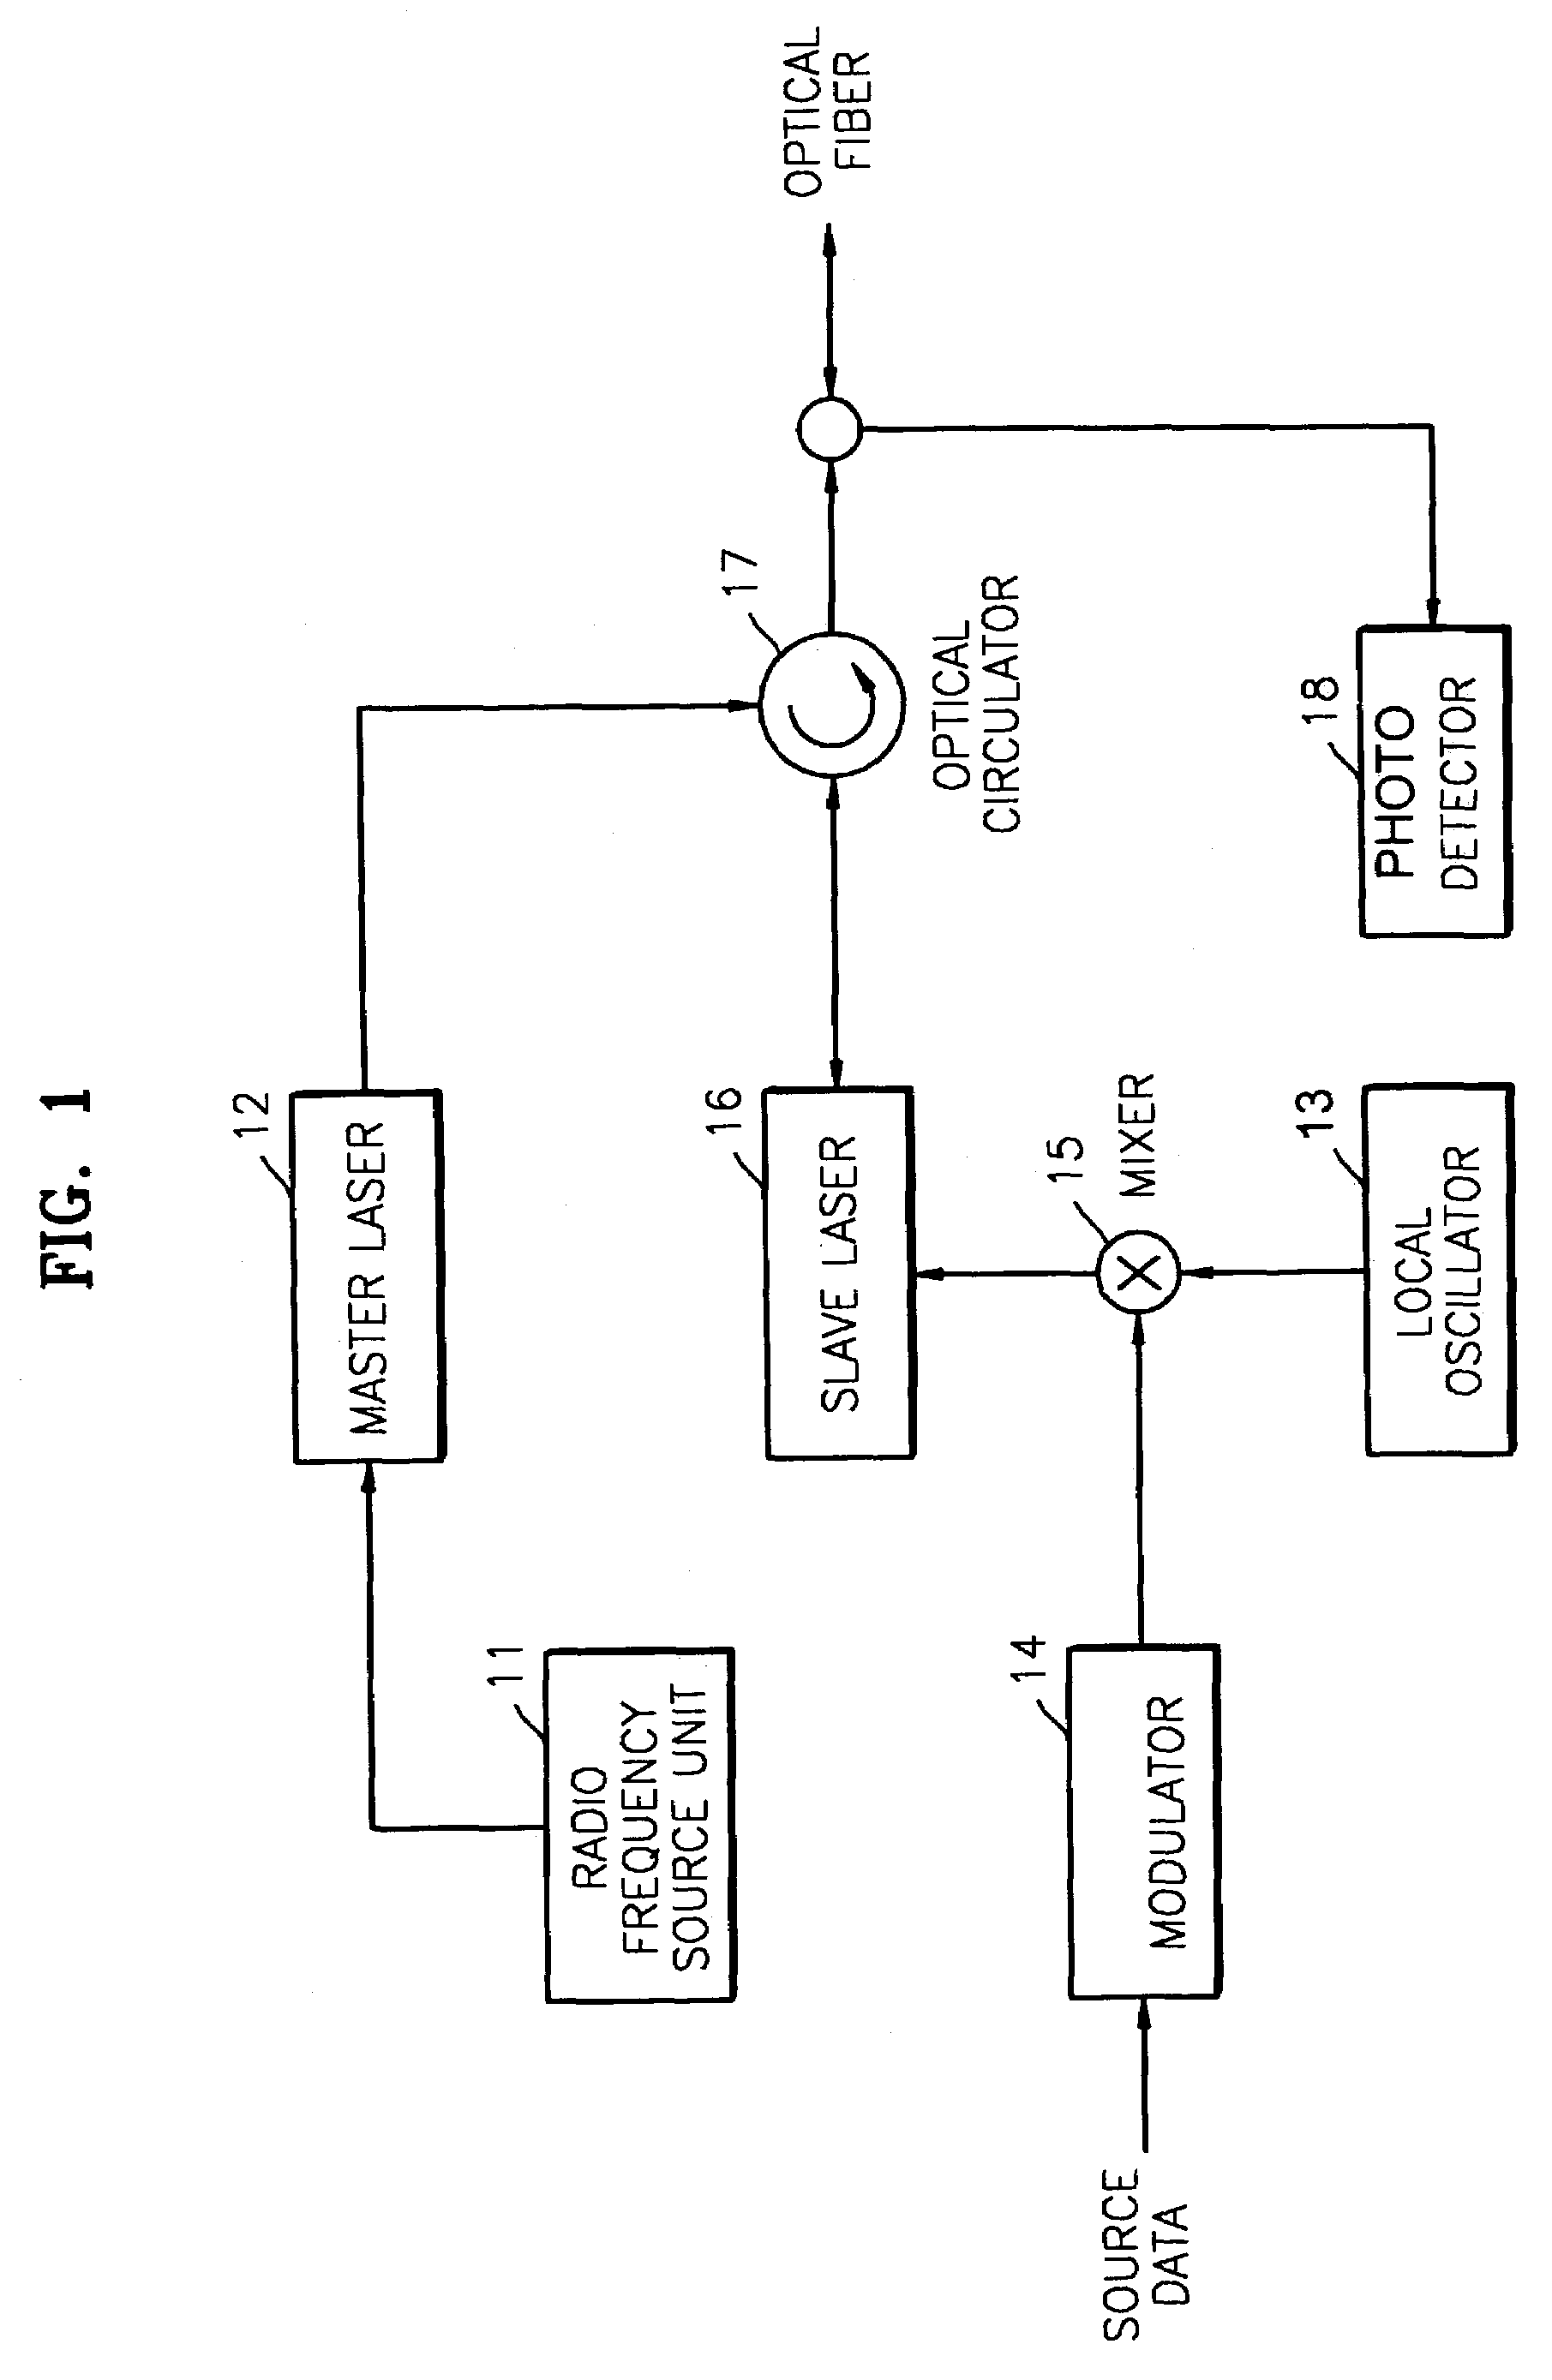 Method and apparatus for duplex communication in hybrid fiber-radio systems